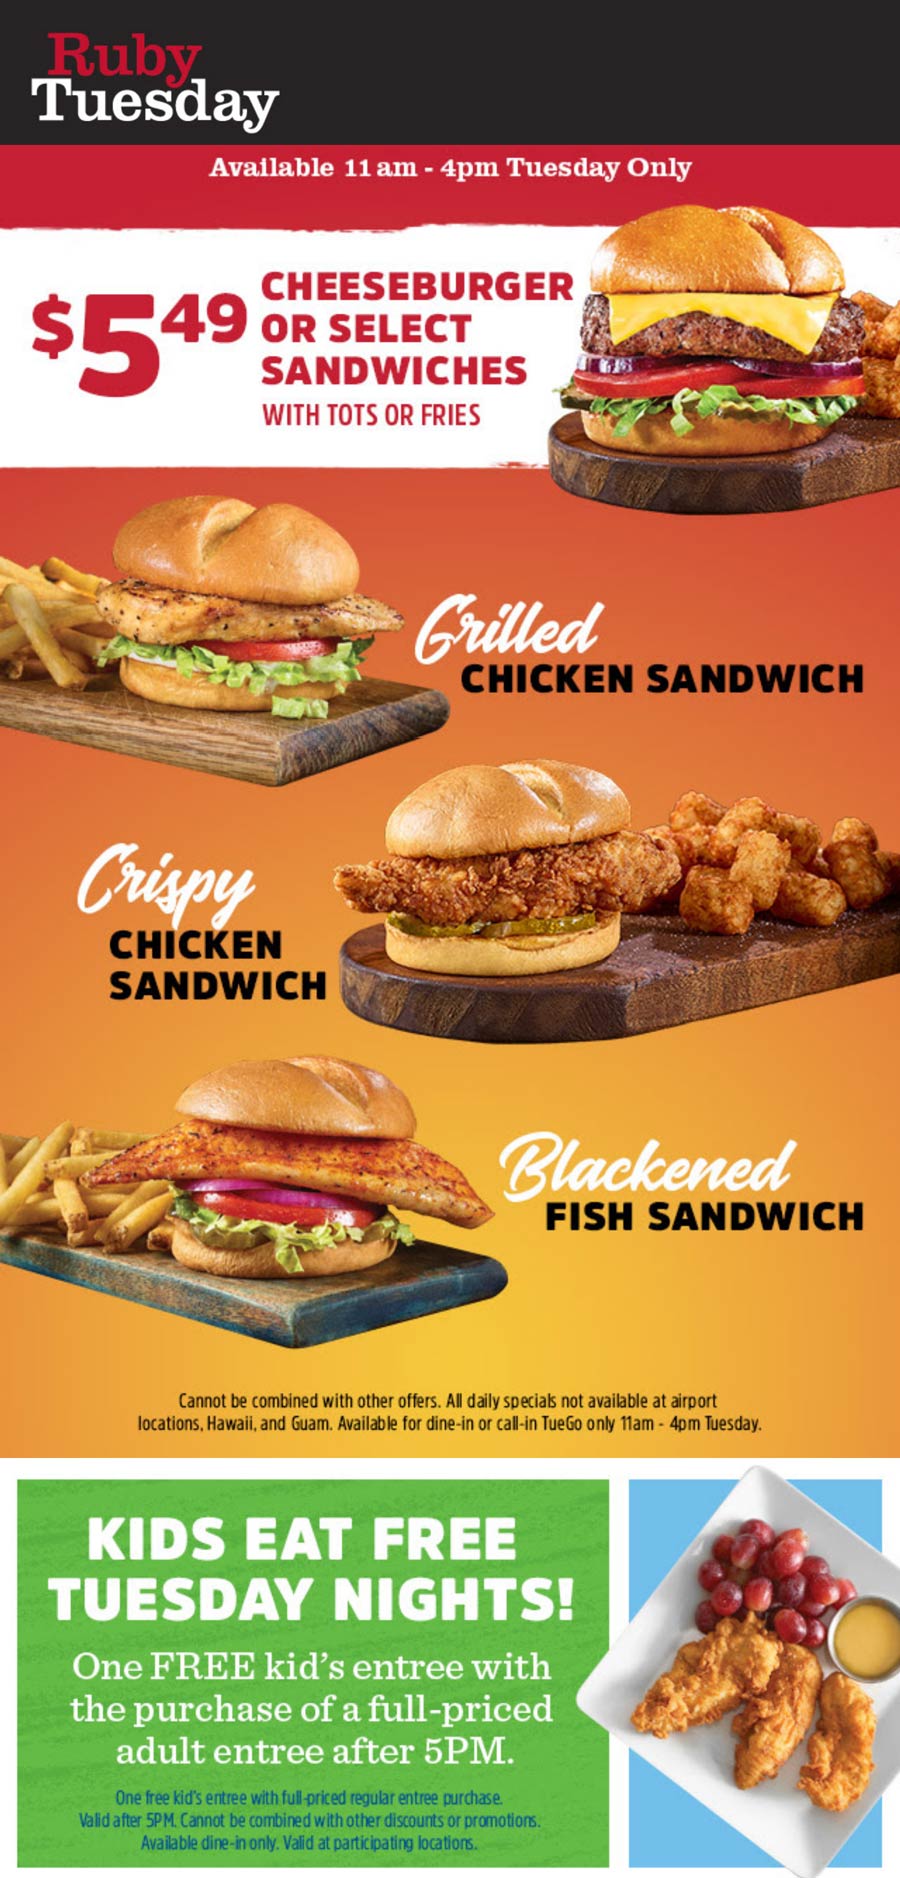 Ruby Tuesday restaurants Coupon  Cheeseburger or grilled chicken sandwich + fries = $5.49 today at Ruby Tuesday #rubytuesday 